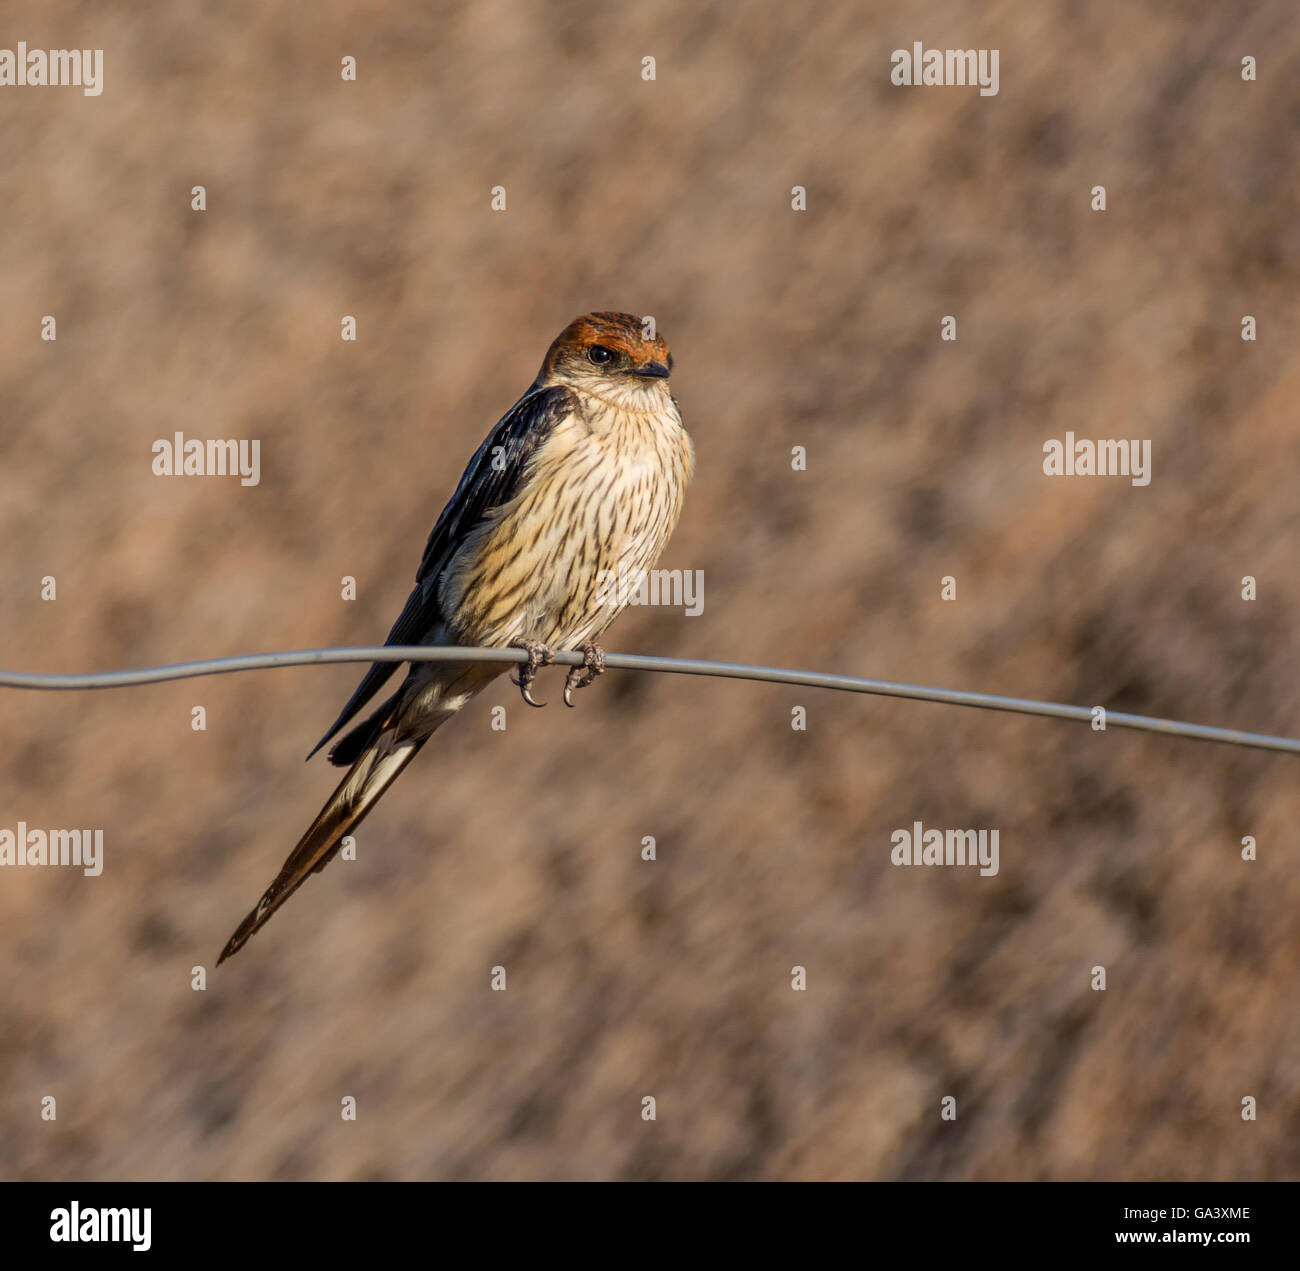 A Greater Striped Swallow perches on a wire fence in Southern Africa Stock Photo